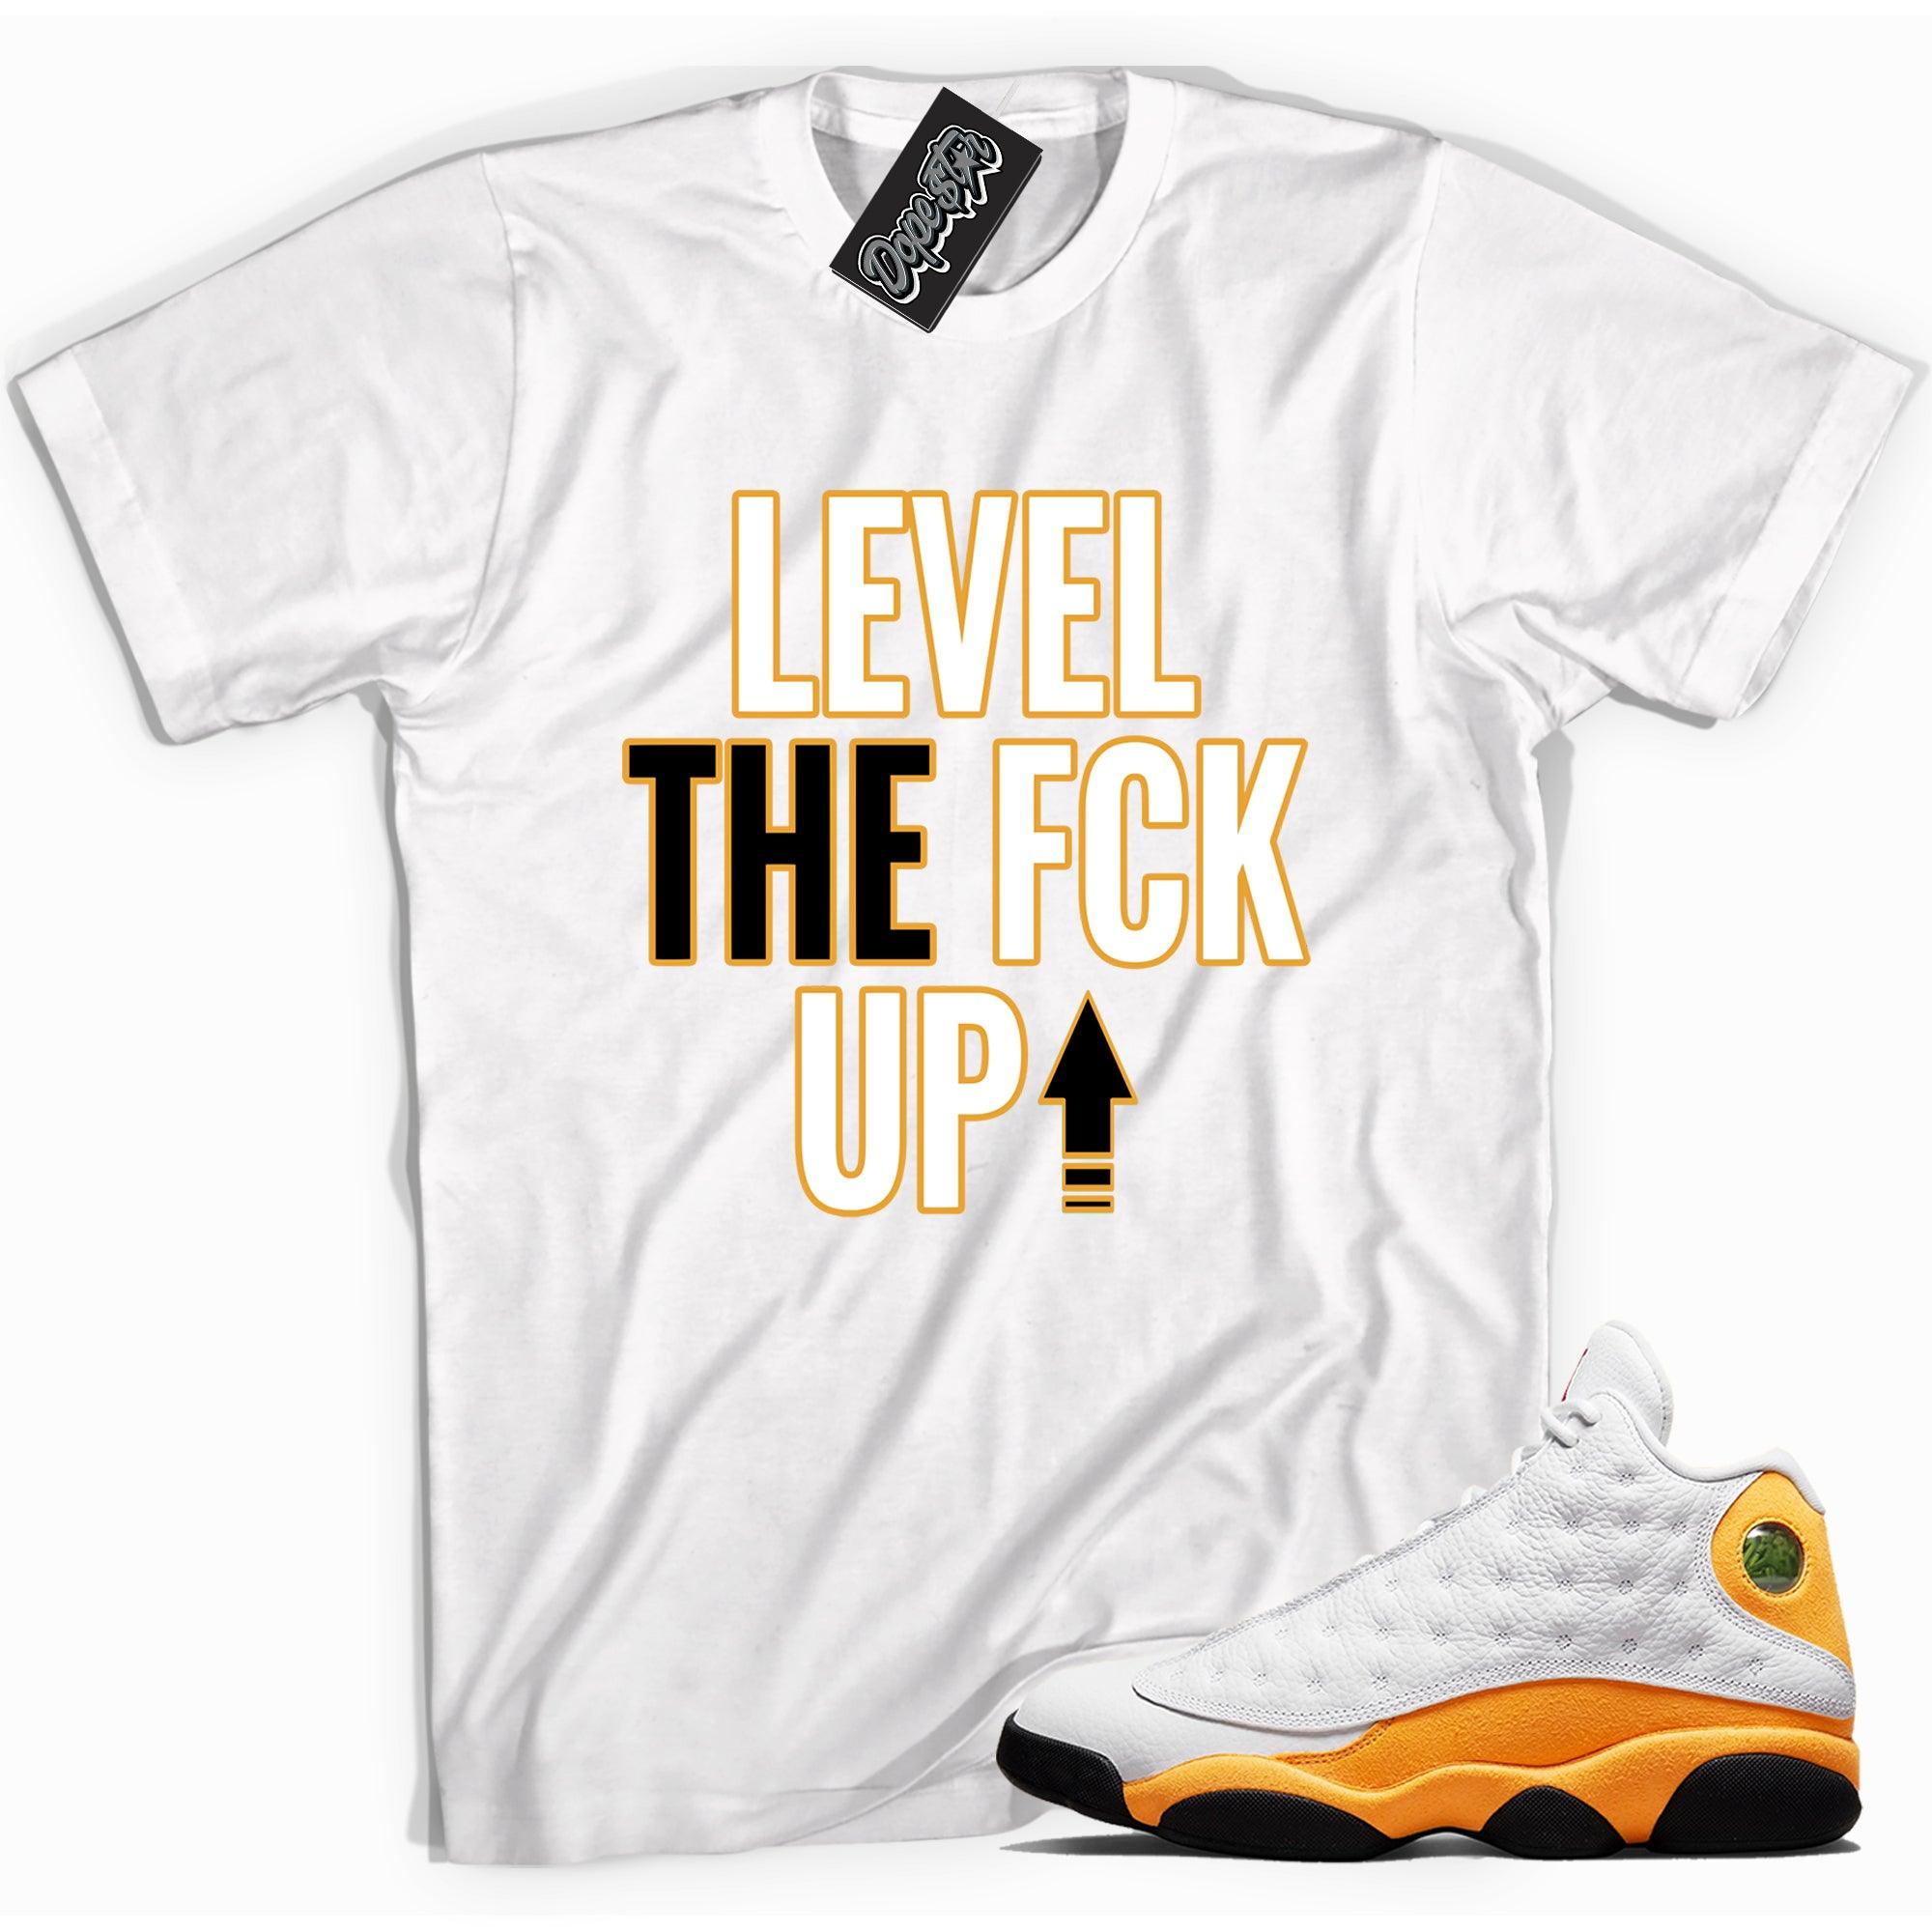 Cool white graphic tee with 'Level Up' print, that perfectly matches Air Jordan 13 Retro Del Sol Toe sneakers.